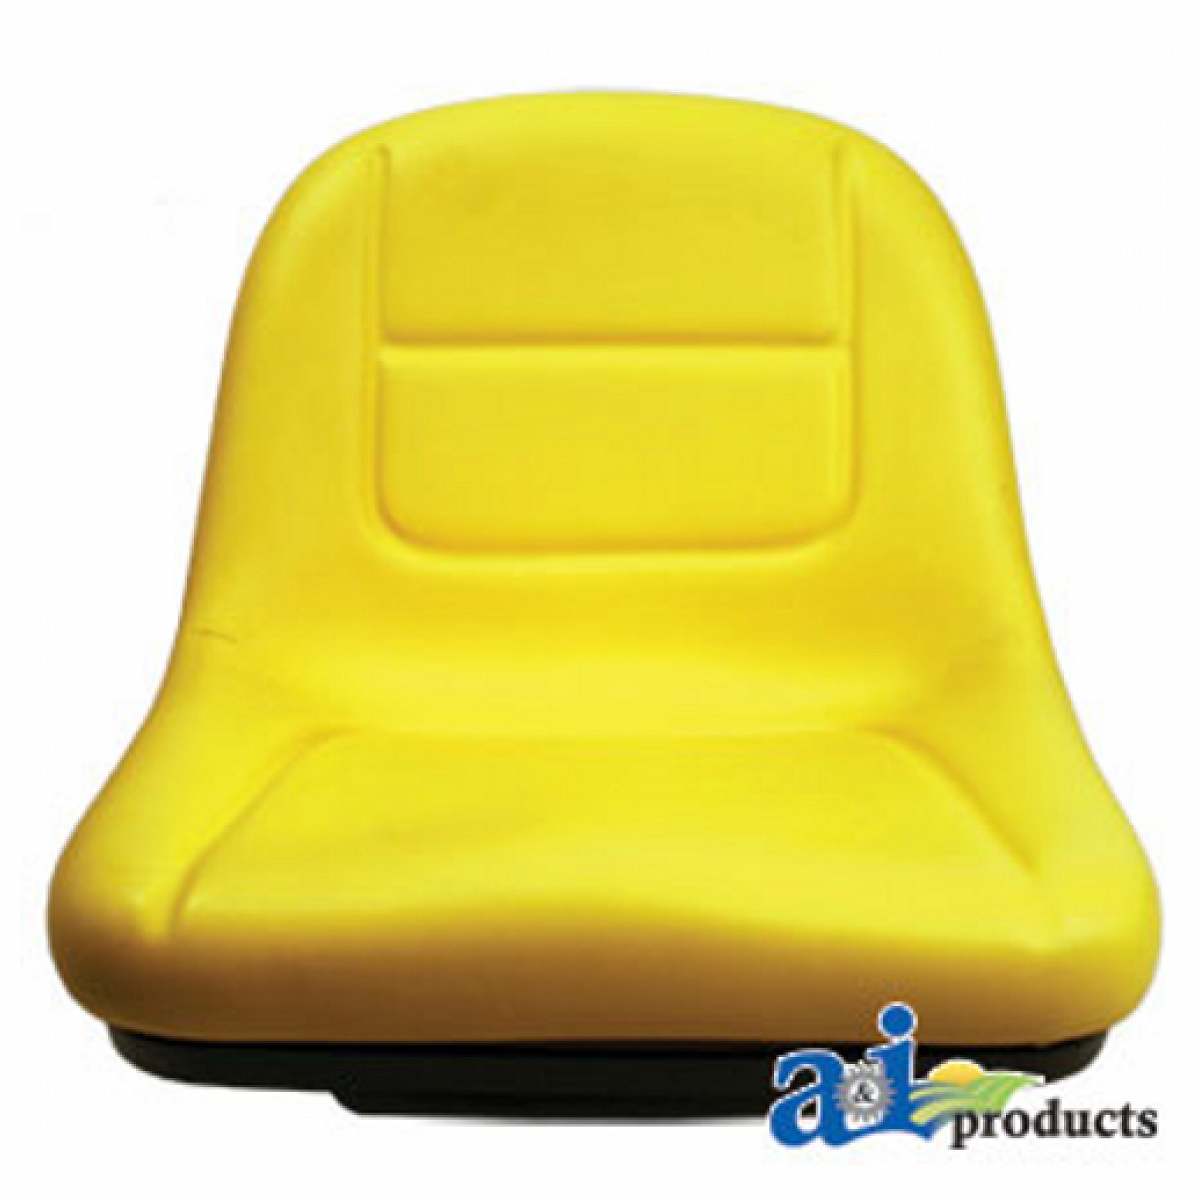 A & I Products GY20496 JOHN DEERE RIDING LAWN MOWER SEAT ...